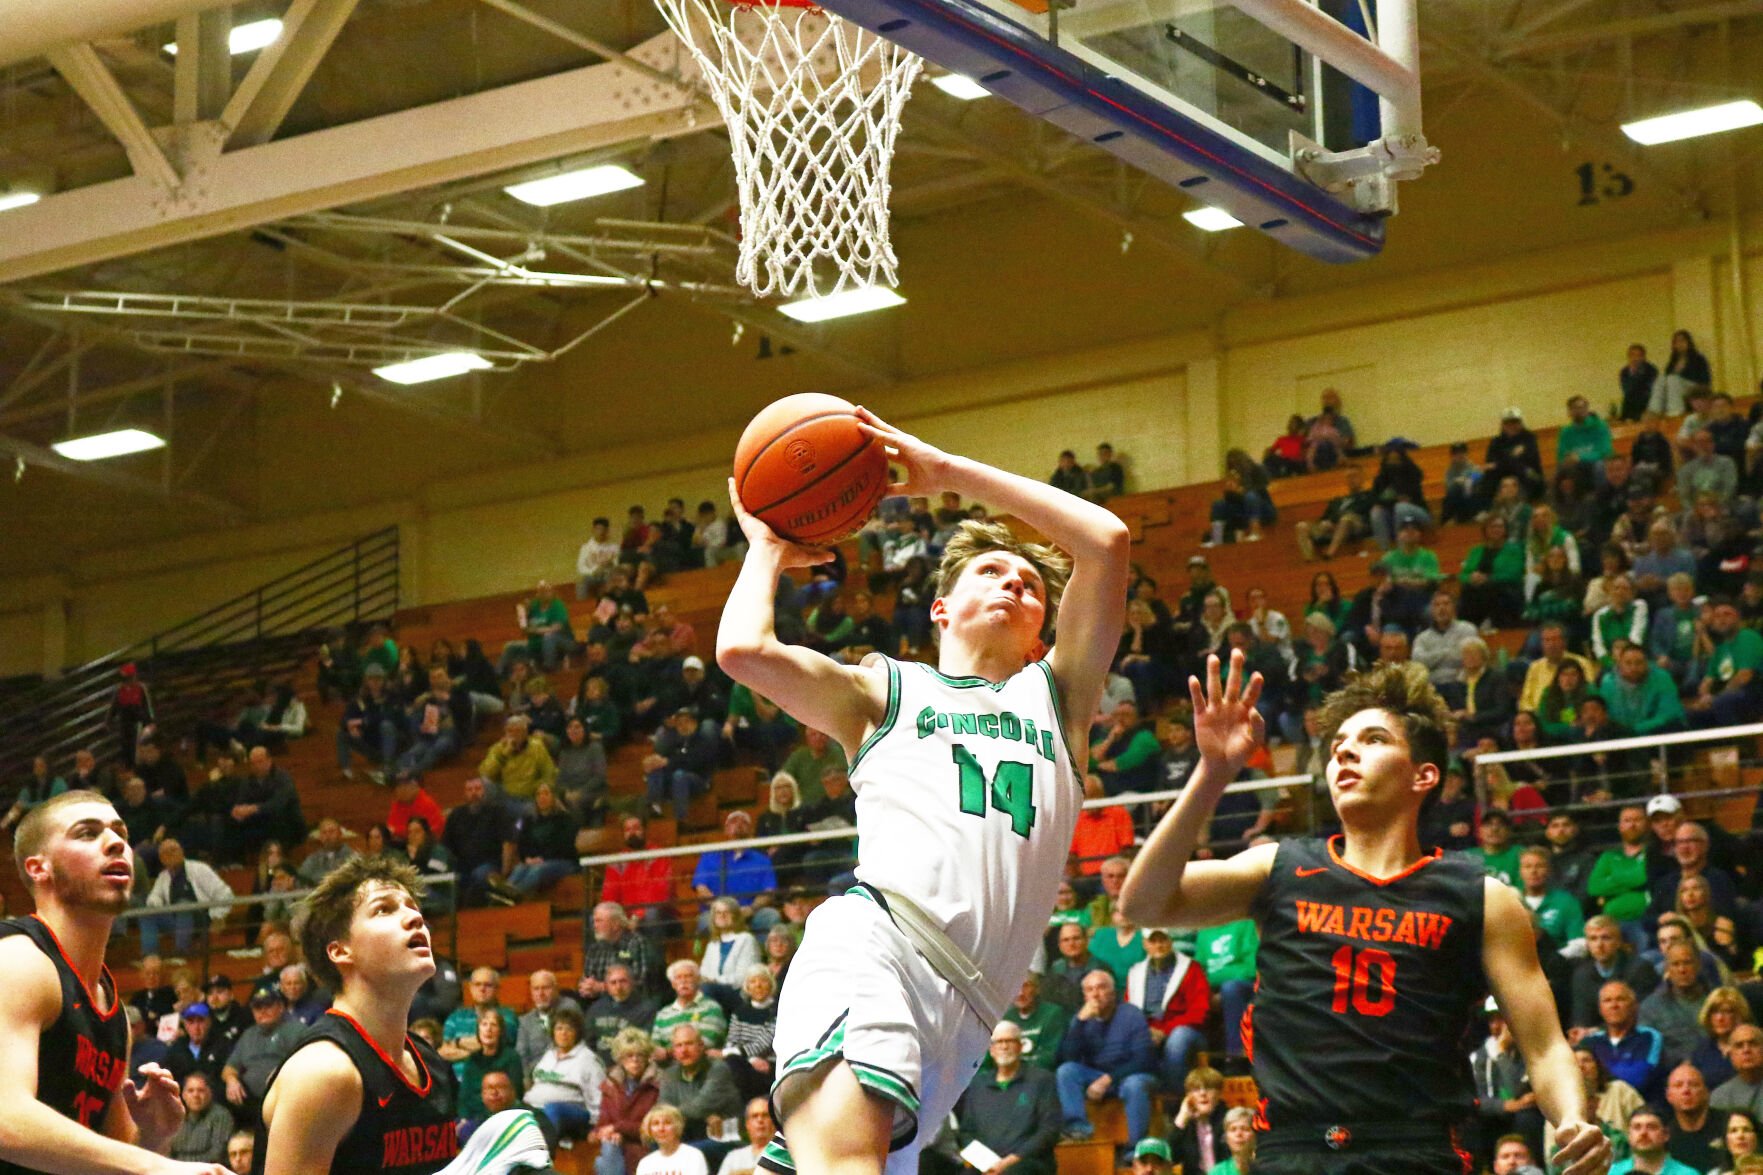 Warsaw dominates Concord with impressive shooting in 4A sectional semifinal win